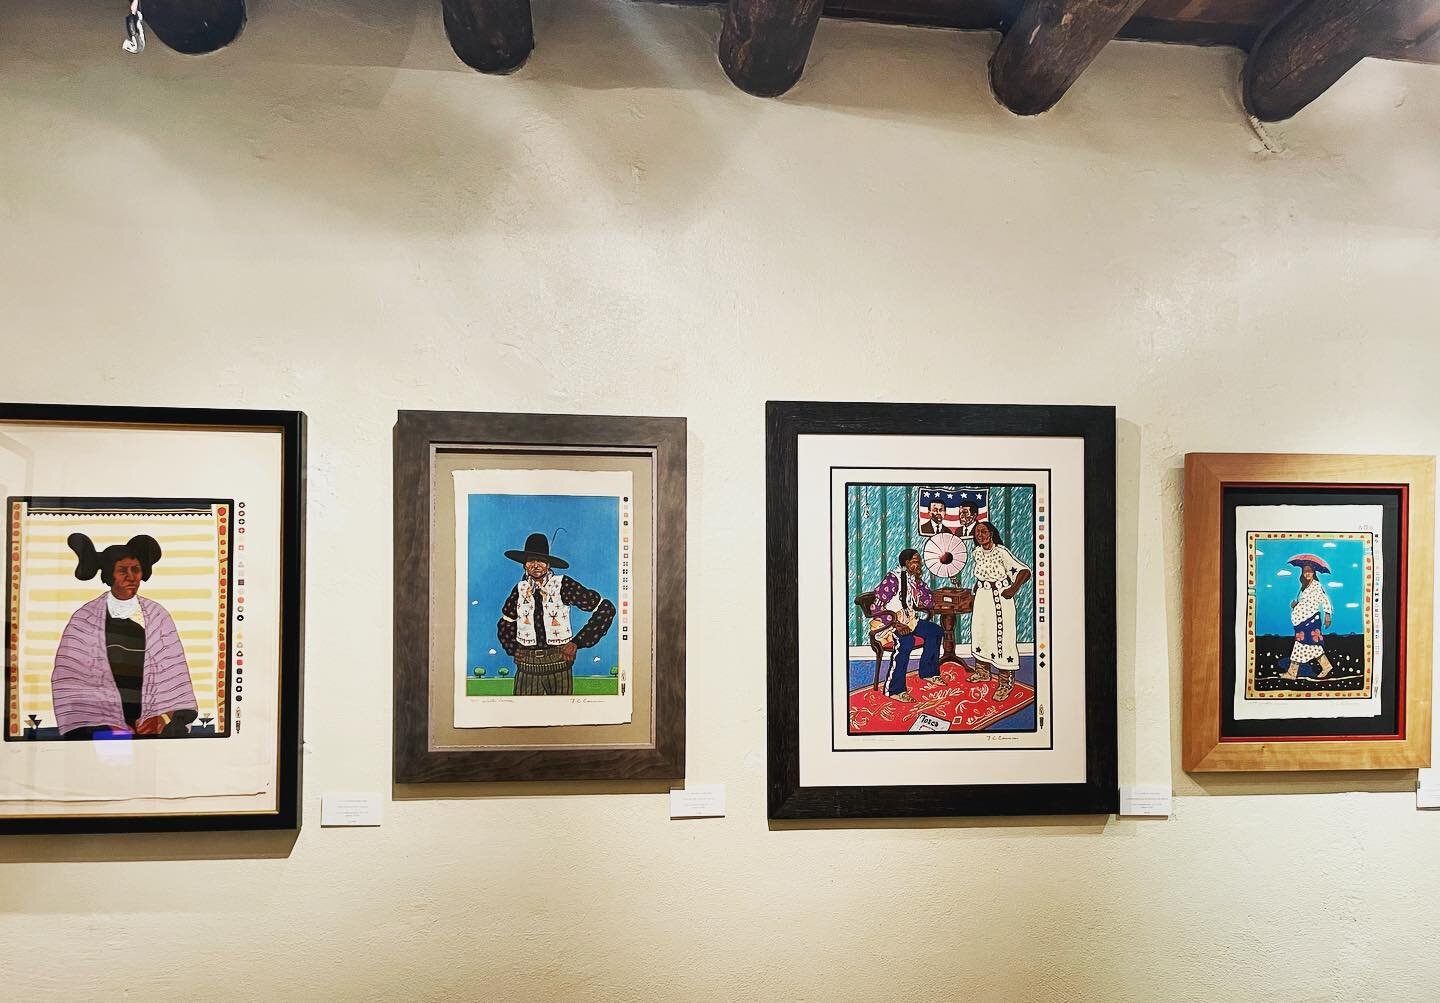 Alongside the rest of Santa Fe (and beyond), Nedra Matteucci Galleries is excitedly gearing up for the centennial #santafeindianmarket next week. 

If you are in town for the festivities, please come have a look at our exceptional offering of TC Cann